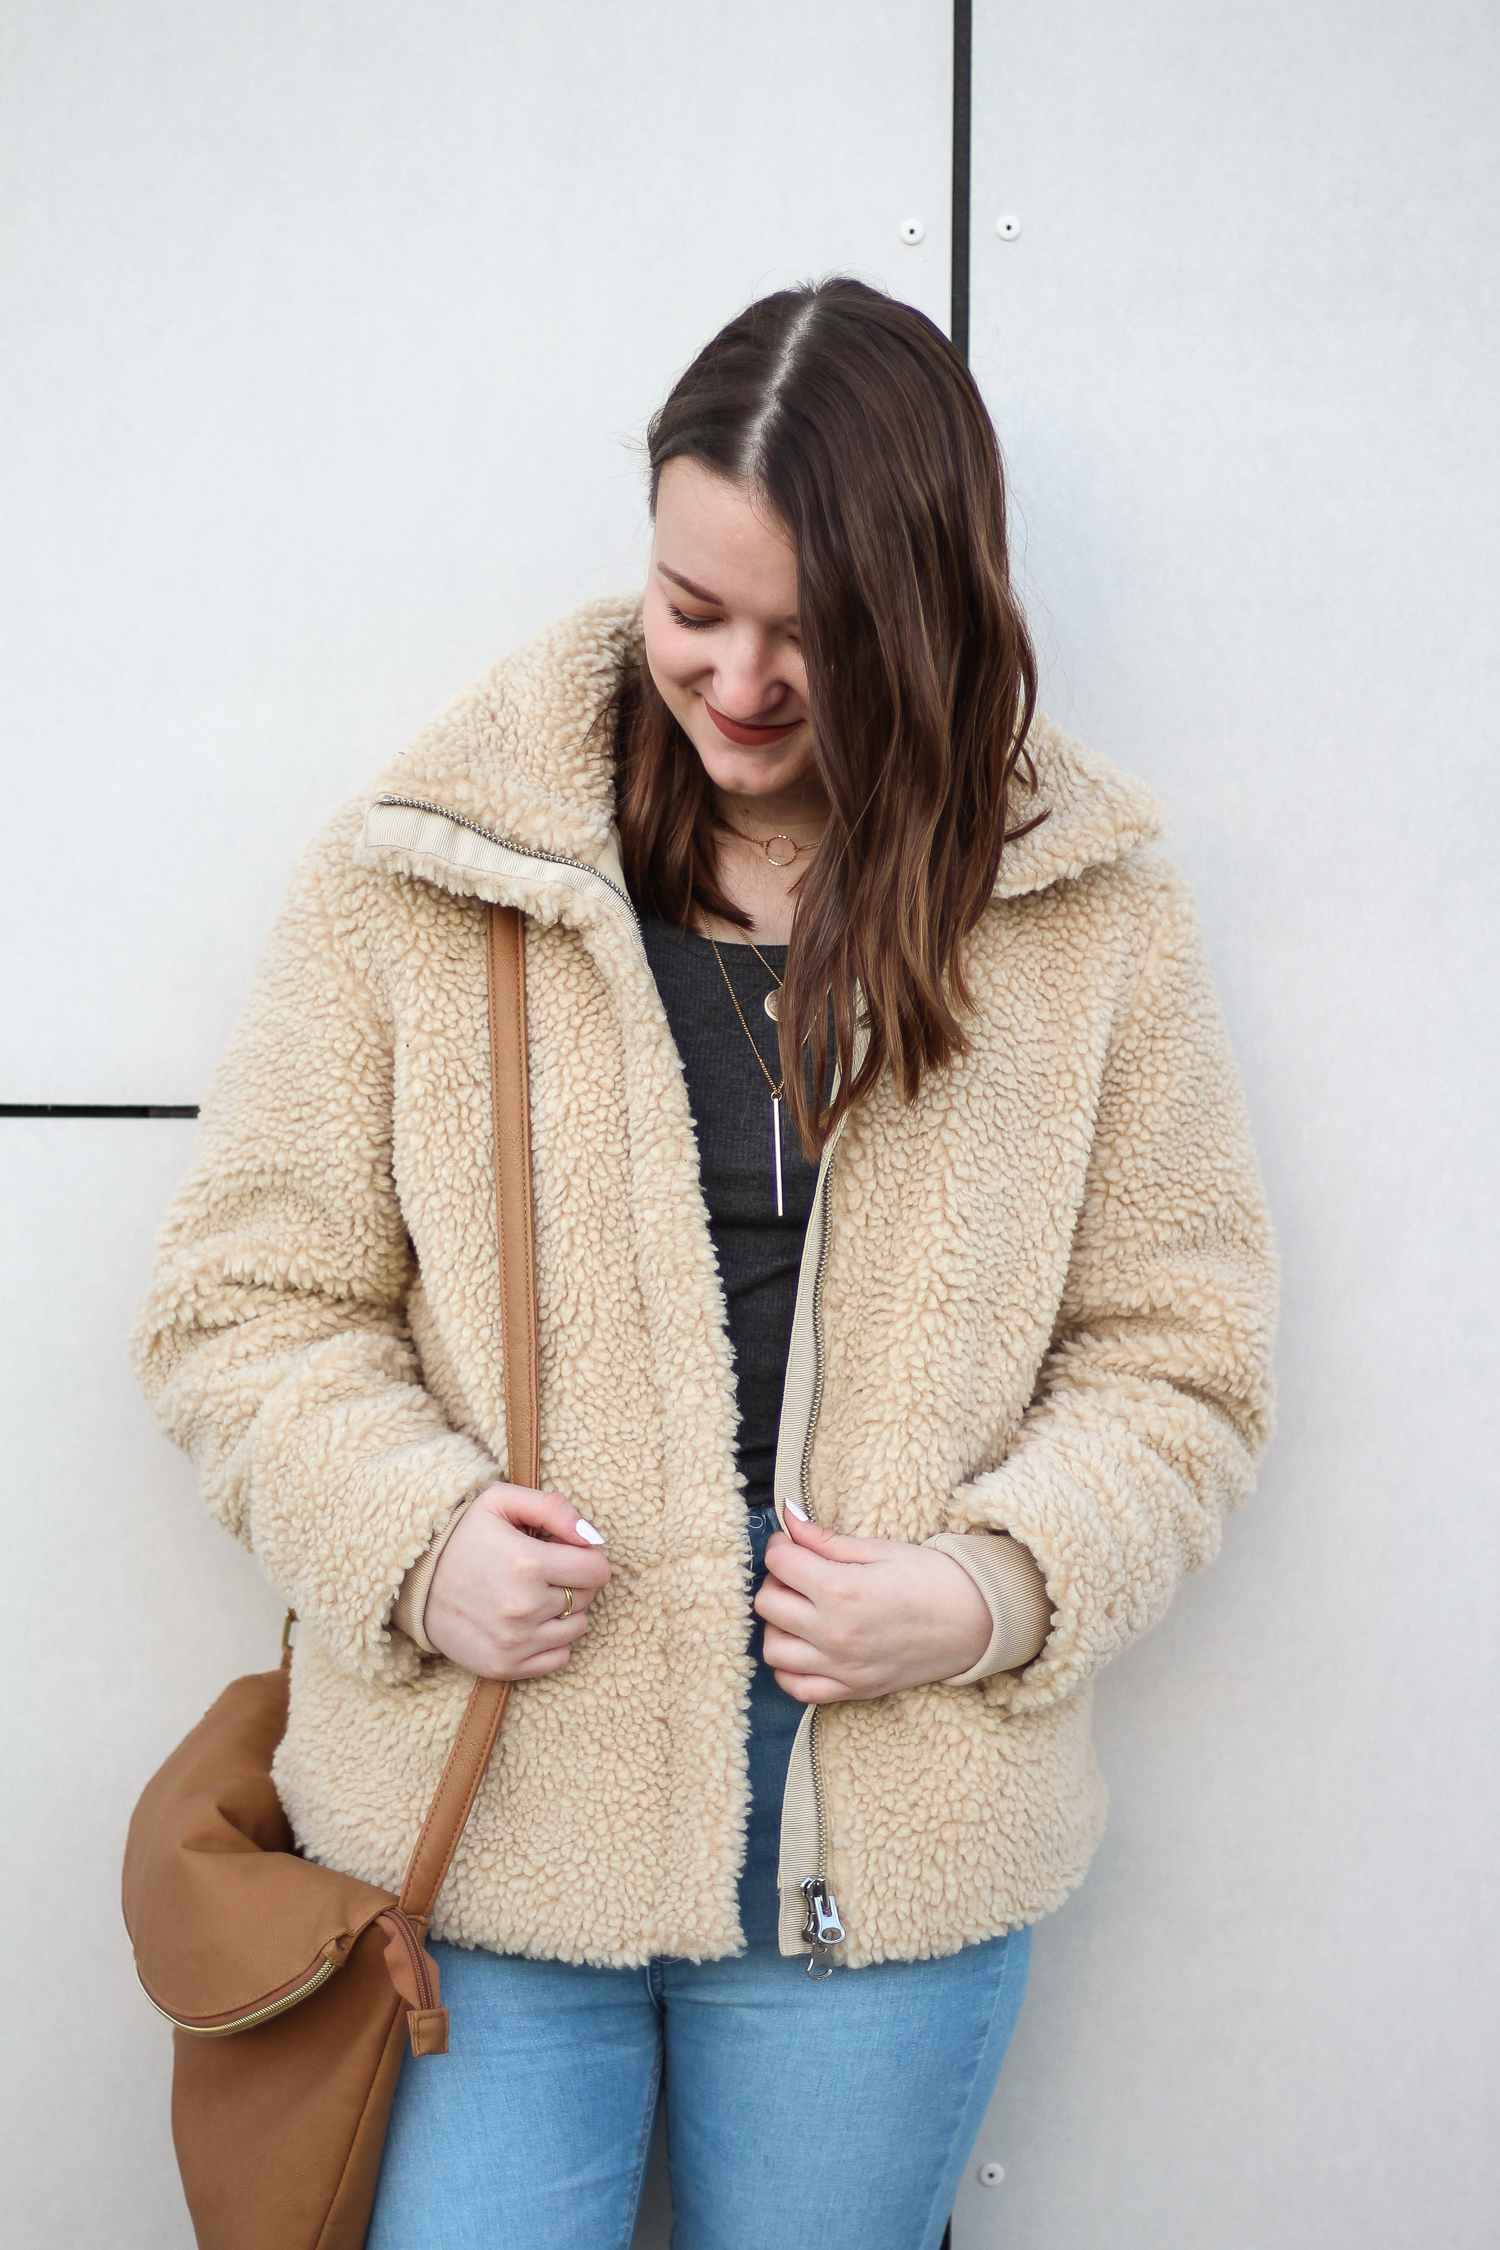 winter coat fashion outfit